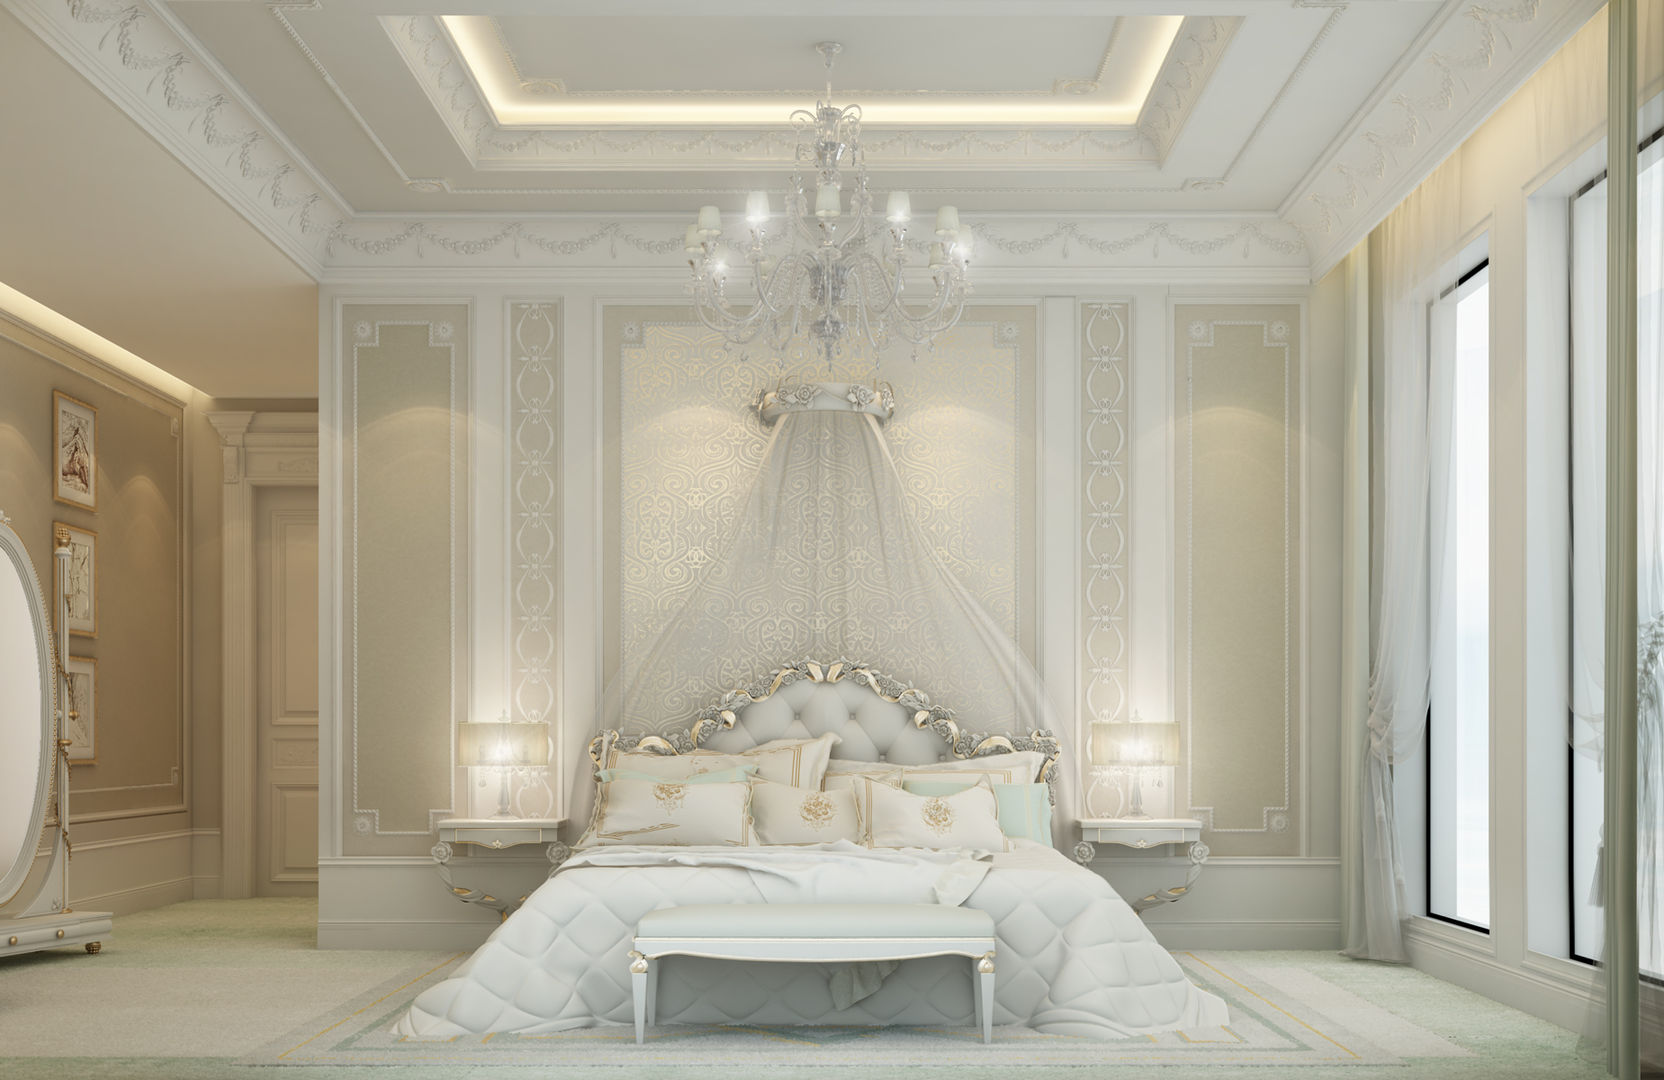 Bedroom Design in Soft and Restful Scheme, IONS DESIGN IONS DESIGN Minimalist bedroom Marble bedroom design,interior design,home design,home interior